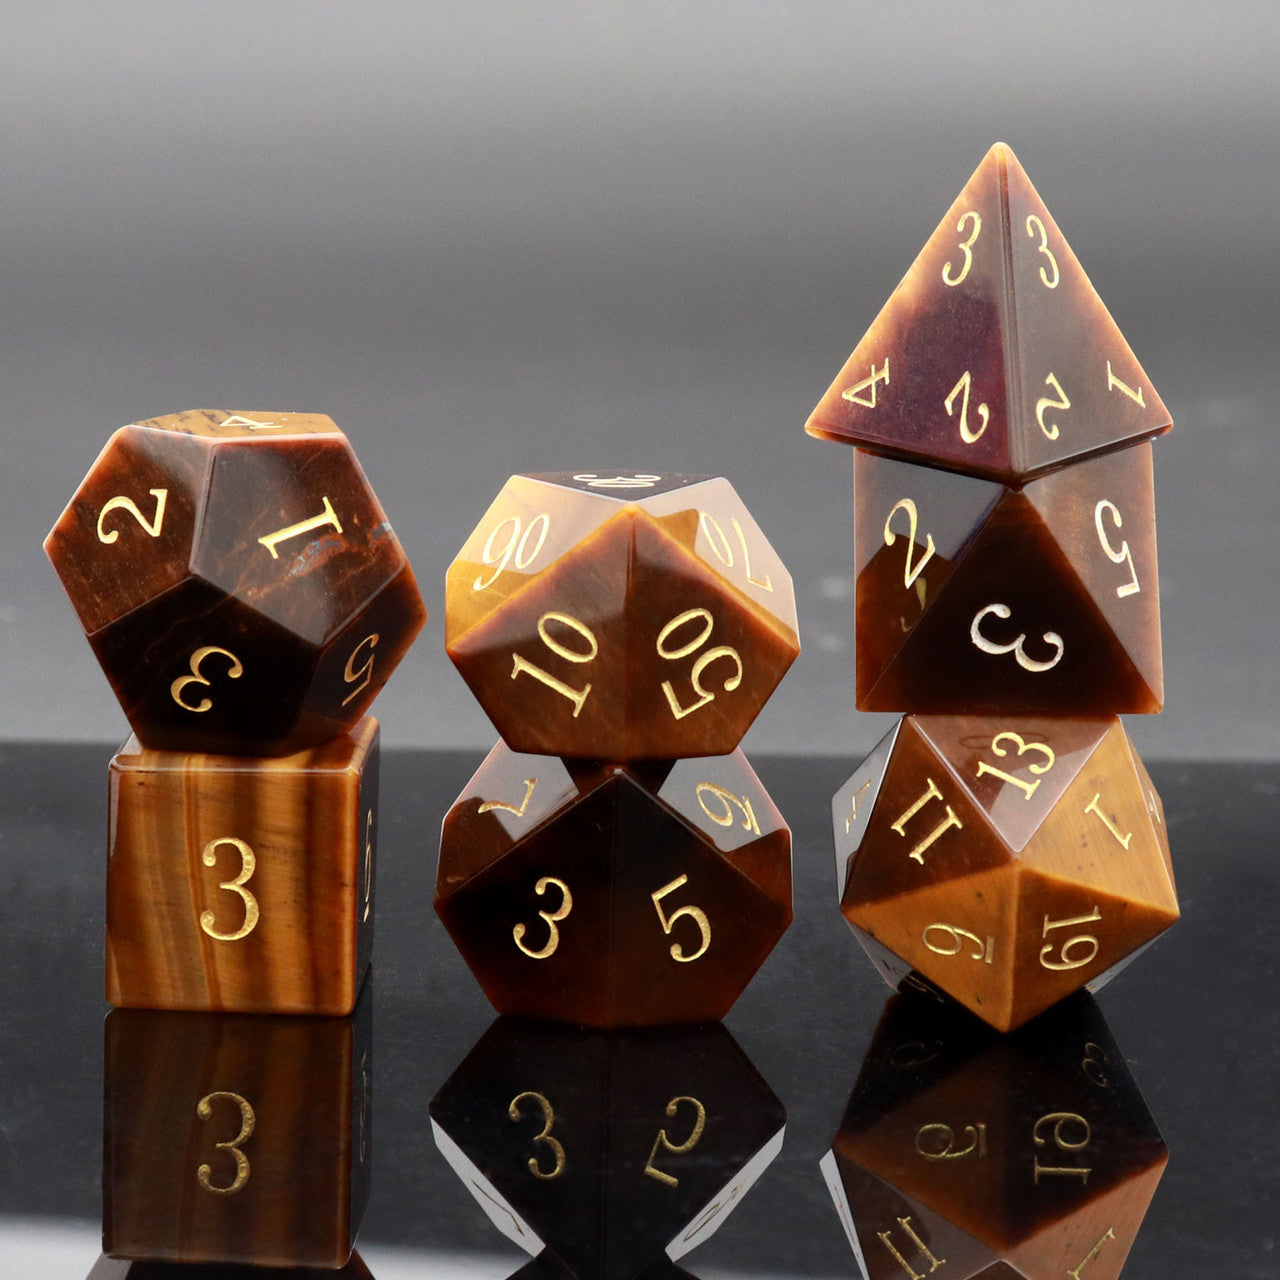 Tiger's Eye dice, Natural stone dice, gemstone dice, dnd dice, haxtec dice, dungeons and dragons